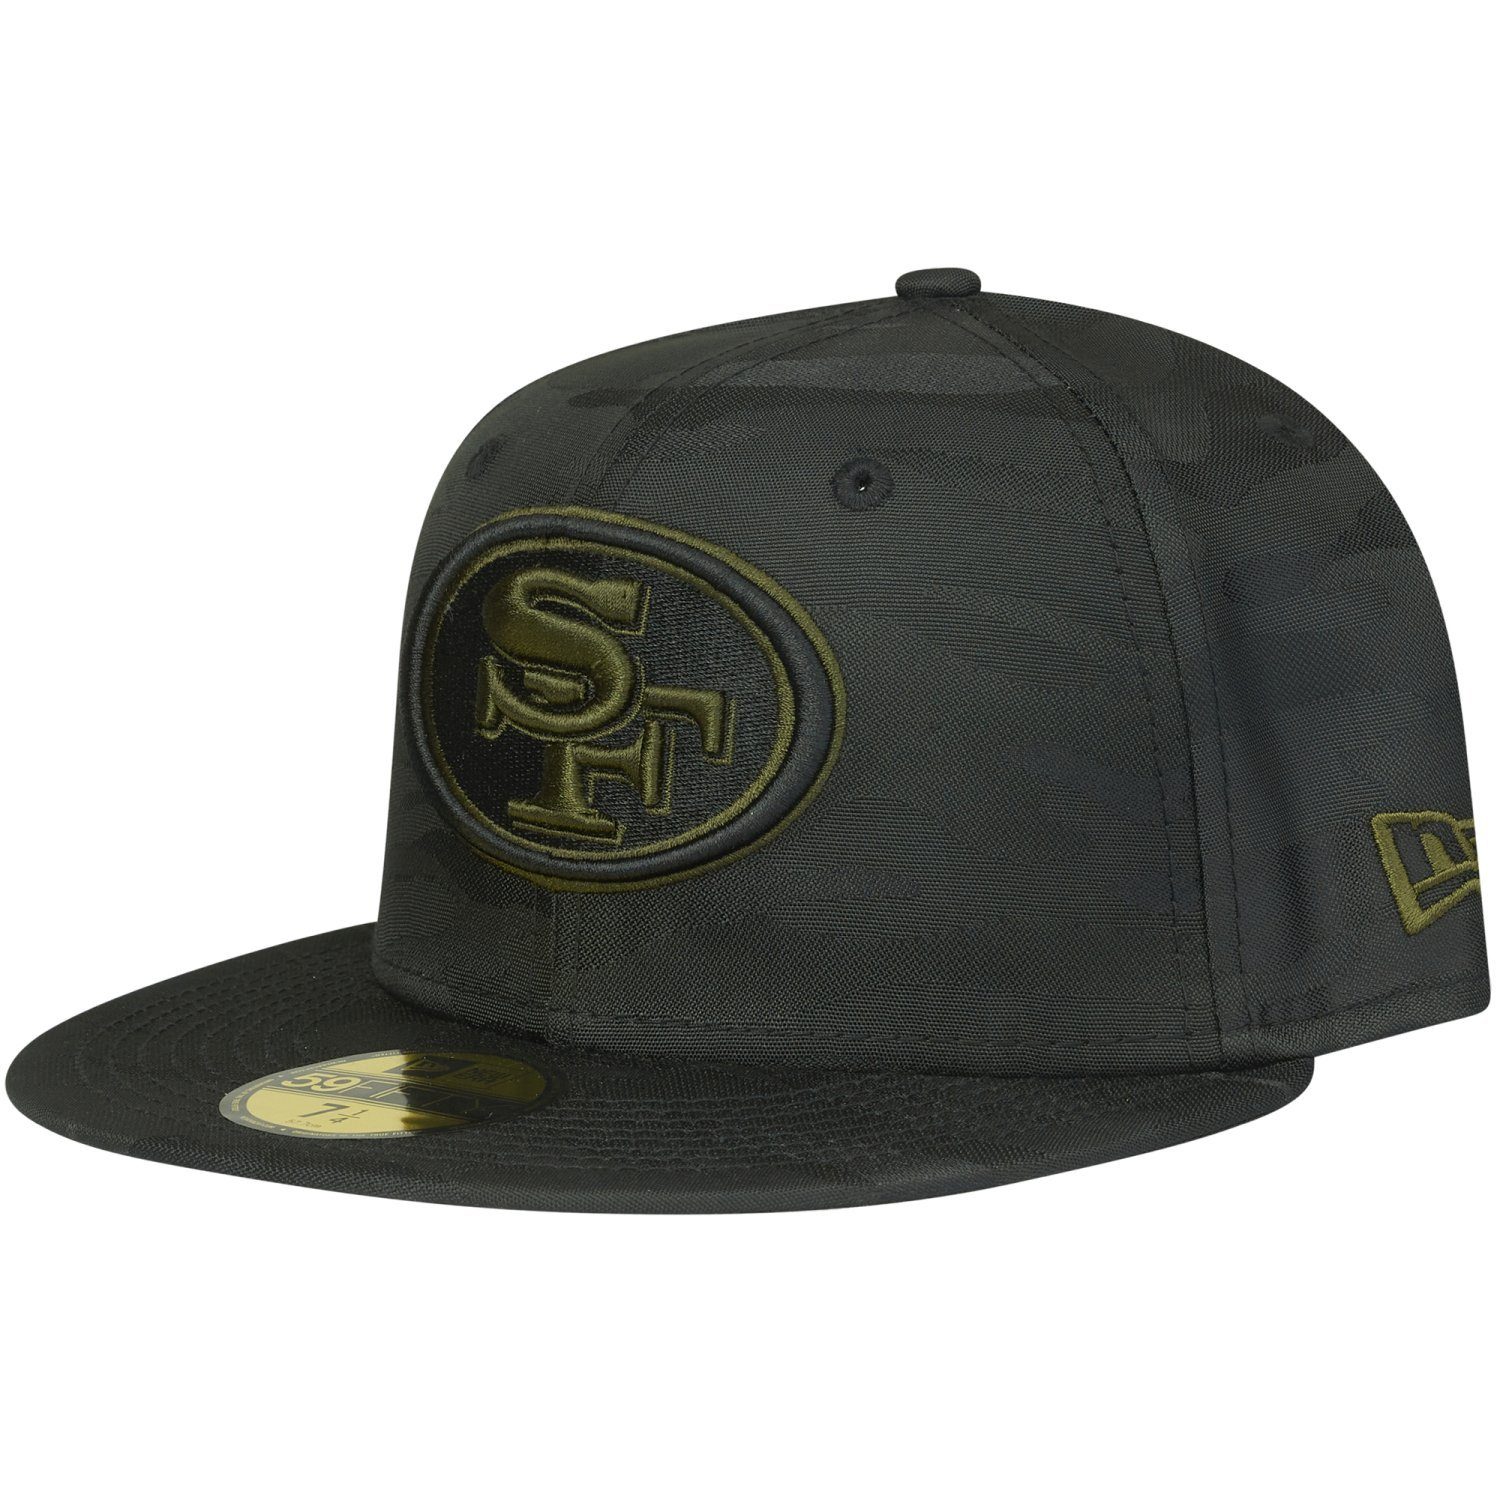 Cap TEAMS San alpine Francisco Fitted New NFL Era 59Fifty 49ers